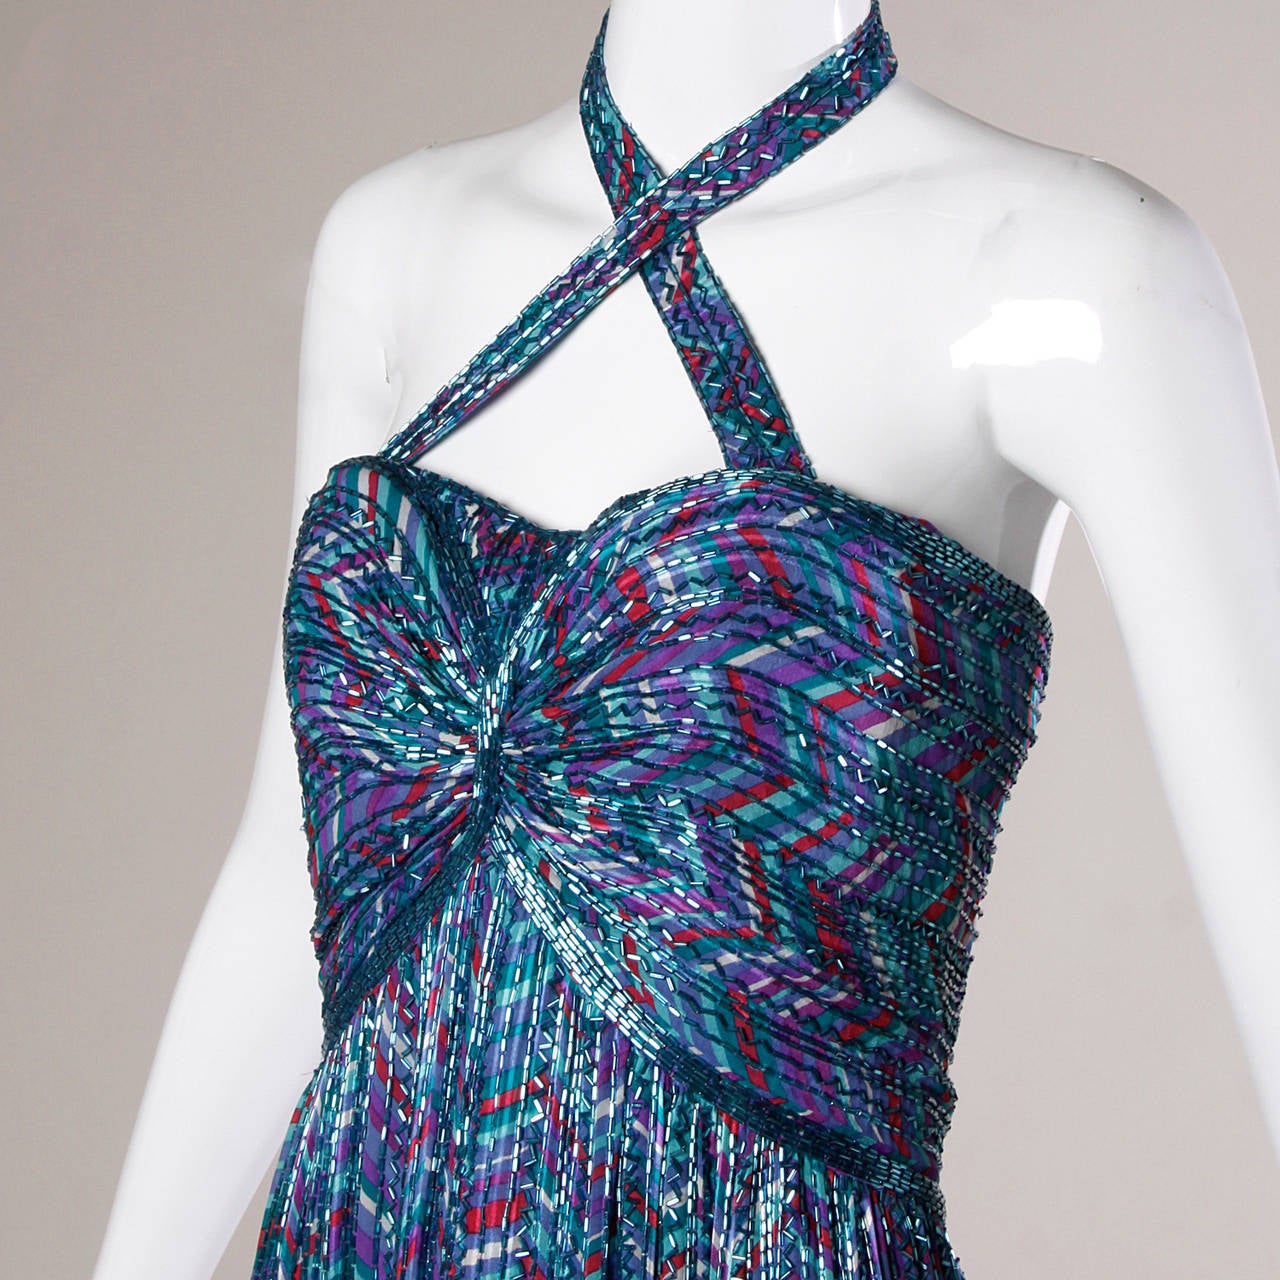 Details:

Fully Lined
Back Zip and Hook Closure
Marked Size: 8
Estimated Size: XS-S
Color: Iridescent Turquoise/ Sea Blue/ Green Turquoise/ White/ Purple
Fabric: 100% Silk
Label: Bob Mackie/ Isaacson's Atlanta

Measurements:

Bust: